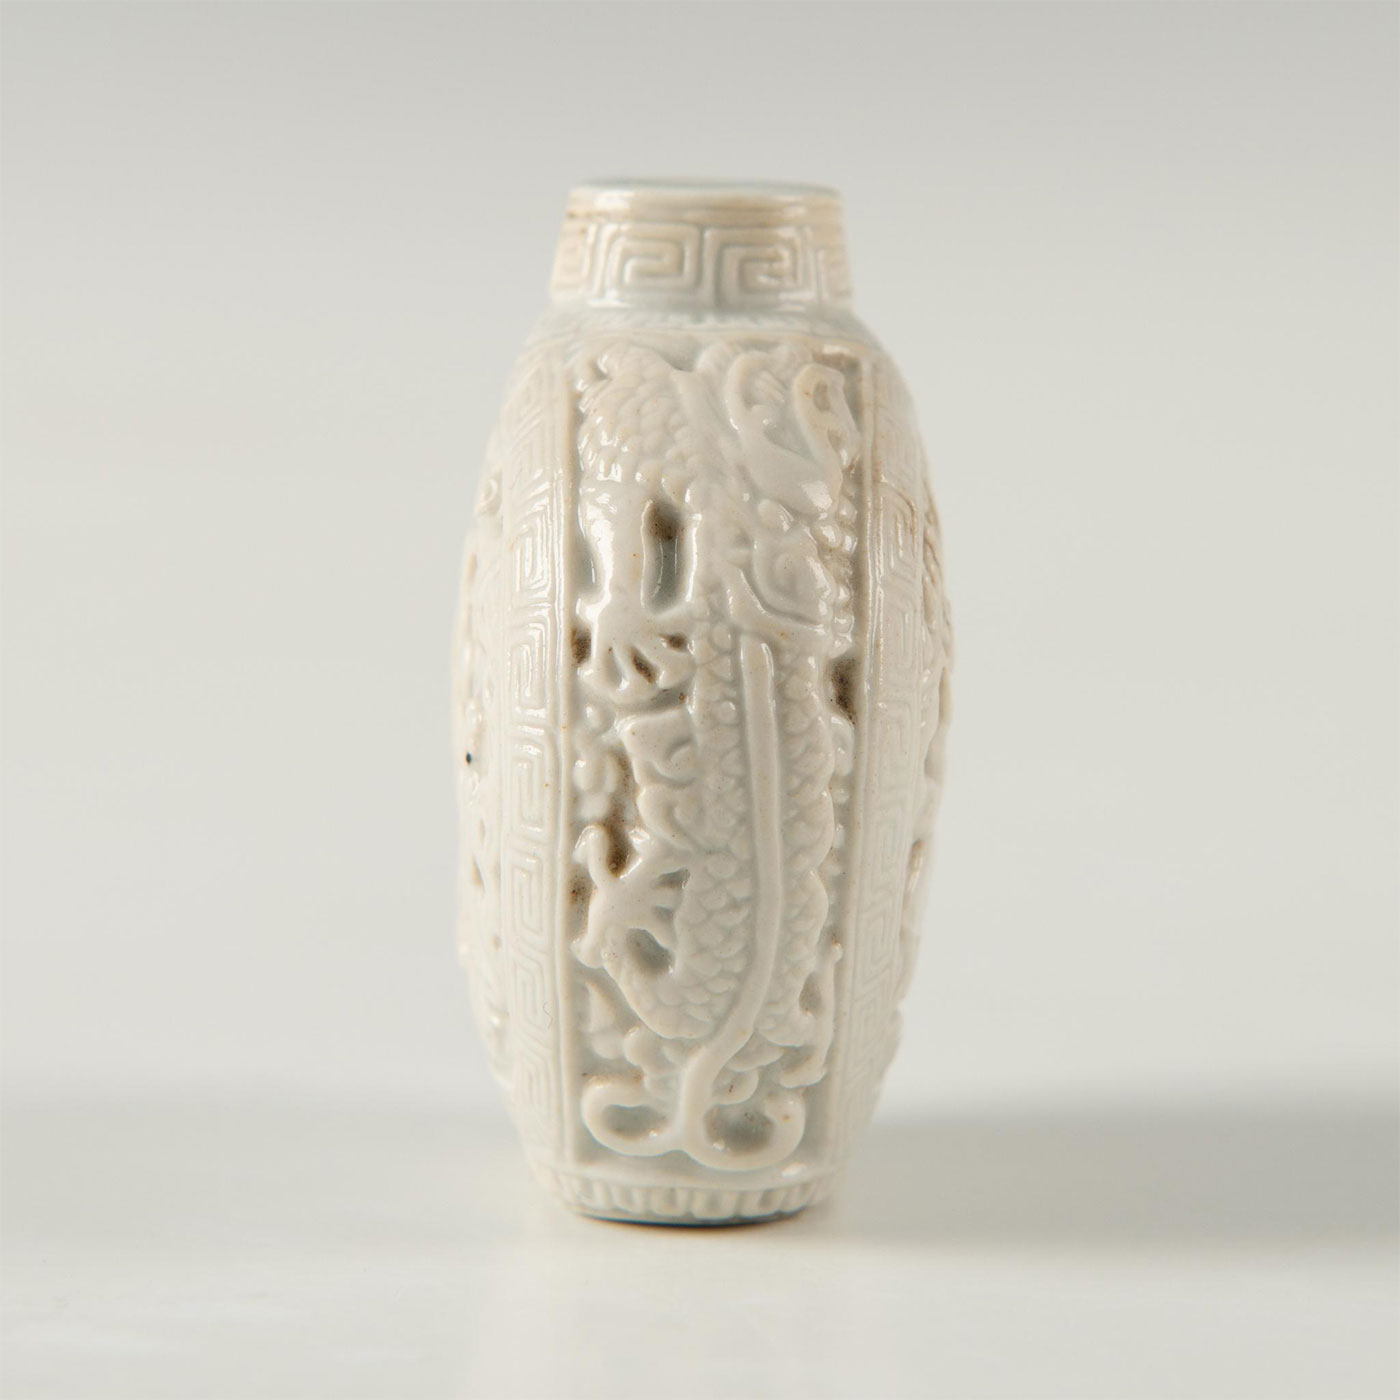 CHINESE LATE QING DYNASTY WHITE PORCELAIN SNUFF BOTTLE - Image 5 of 6